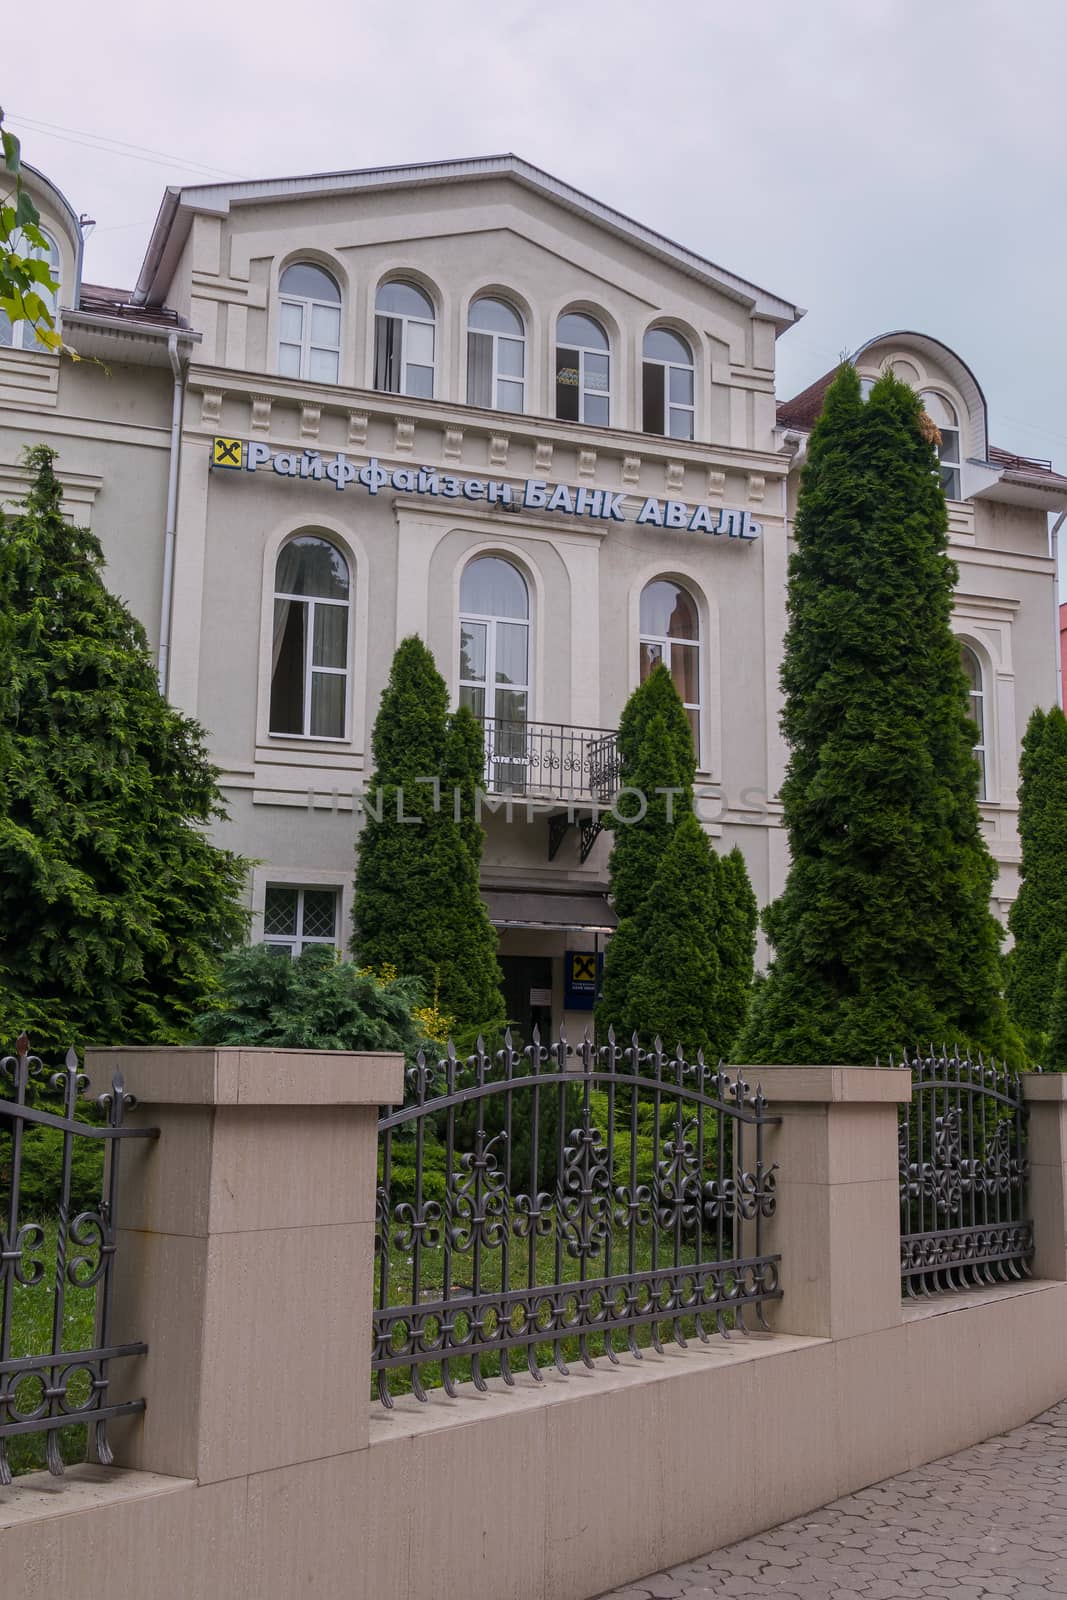 The facade of the building with the letters of the name of the organization and the emblem is located behind the unequal fence with bars and green bushes and trees growing side by side. by Adamchuk